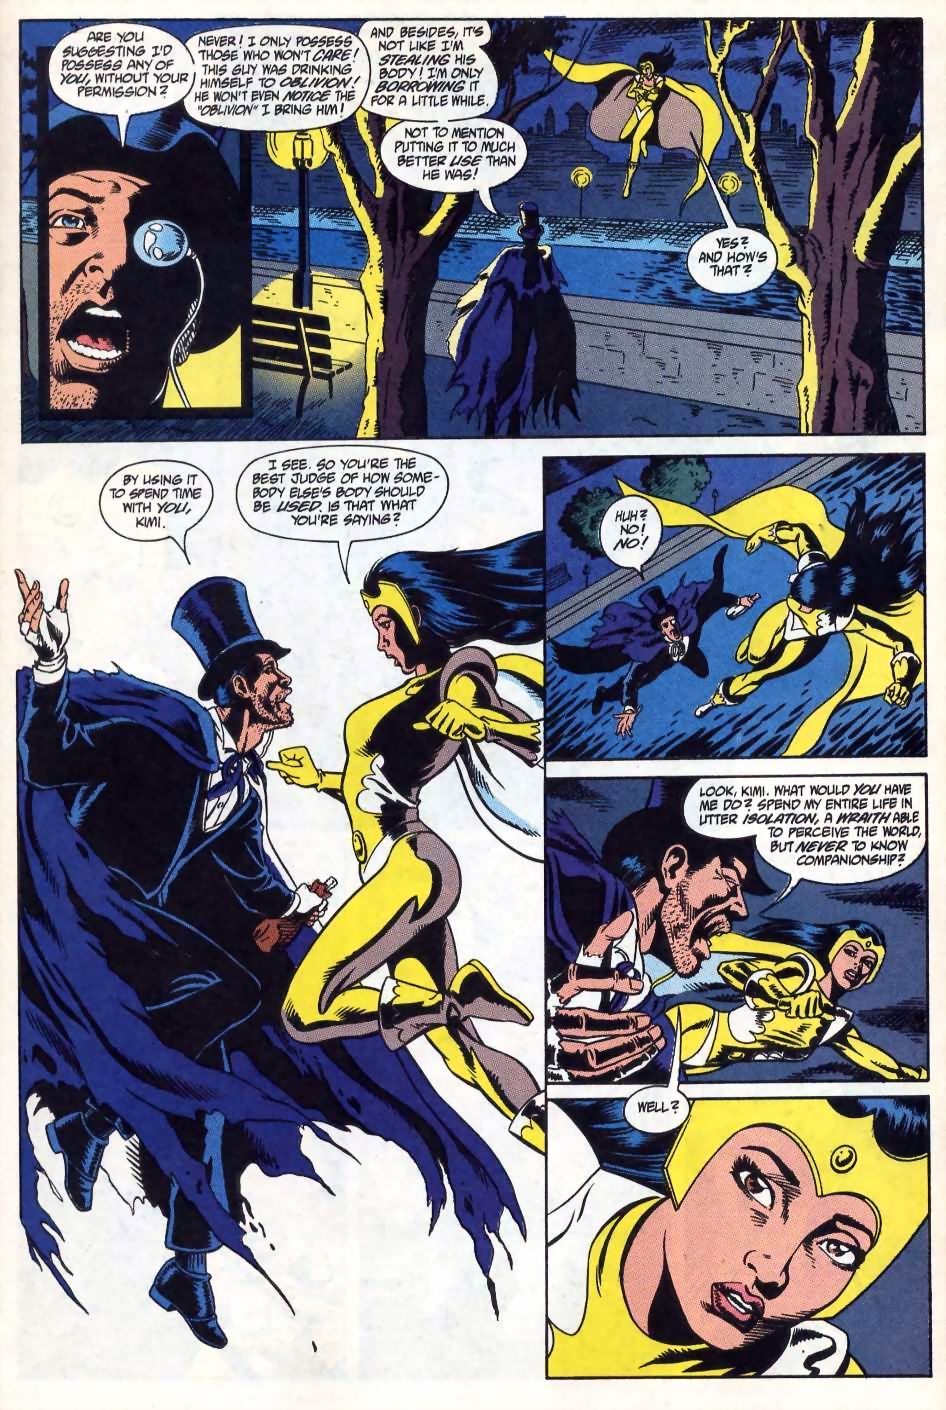 Justice League International (1993) 58 Page 14